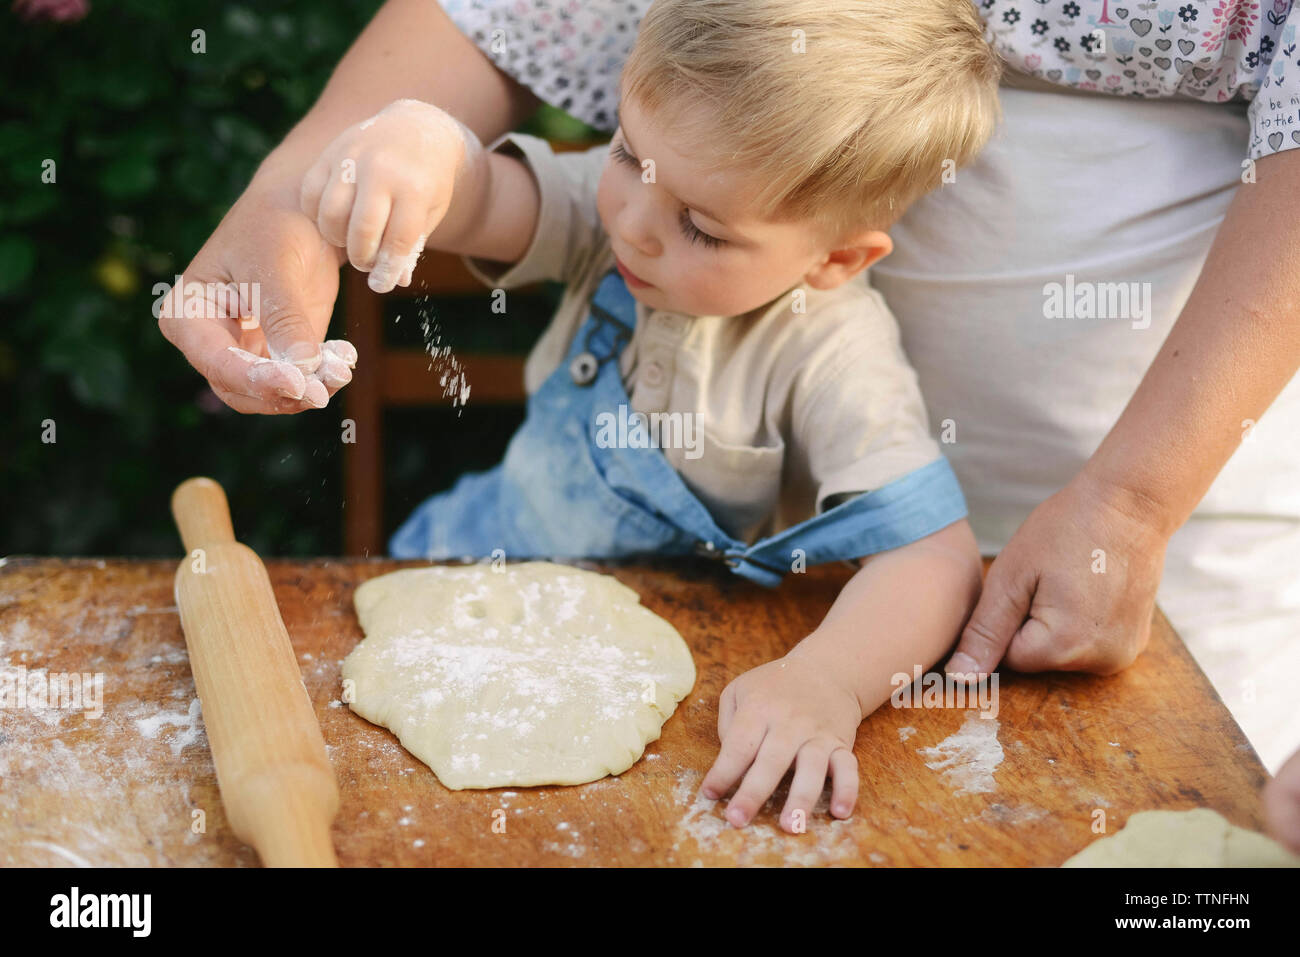 Midsection of mother with son preparing food on wooden table at yard Stock Photo